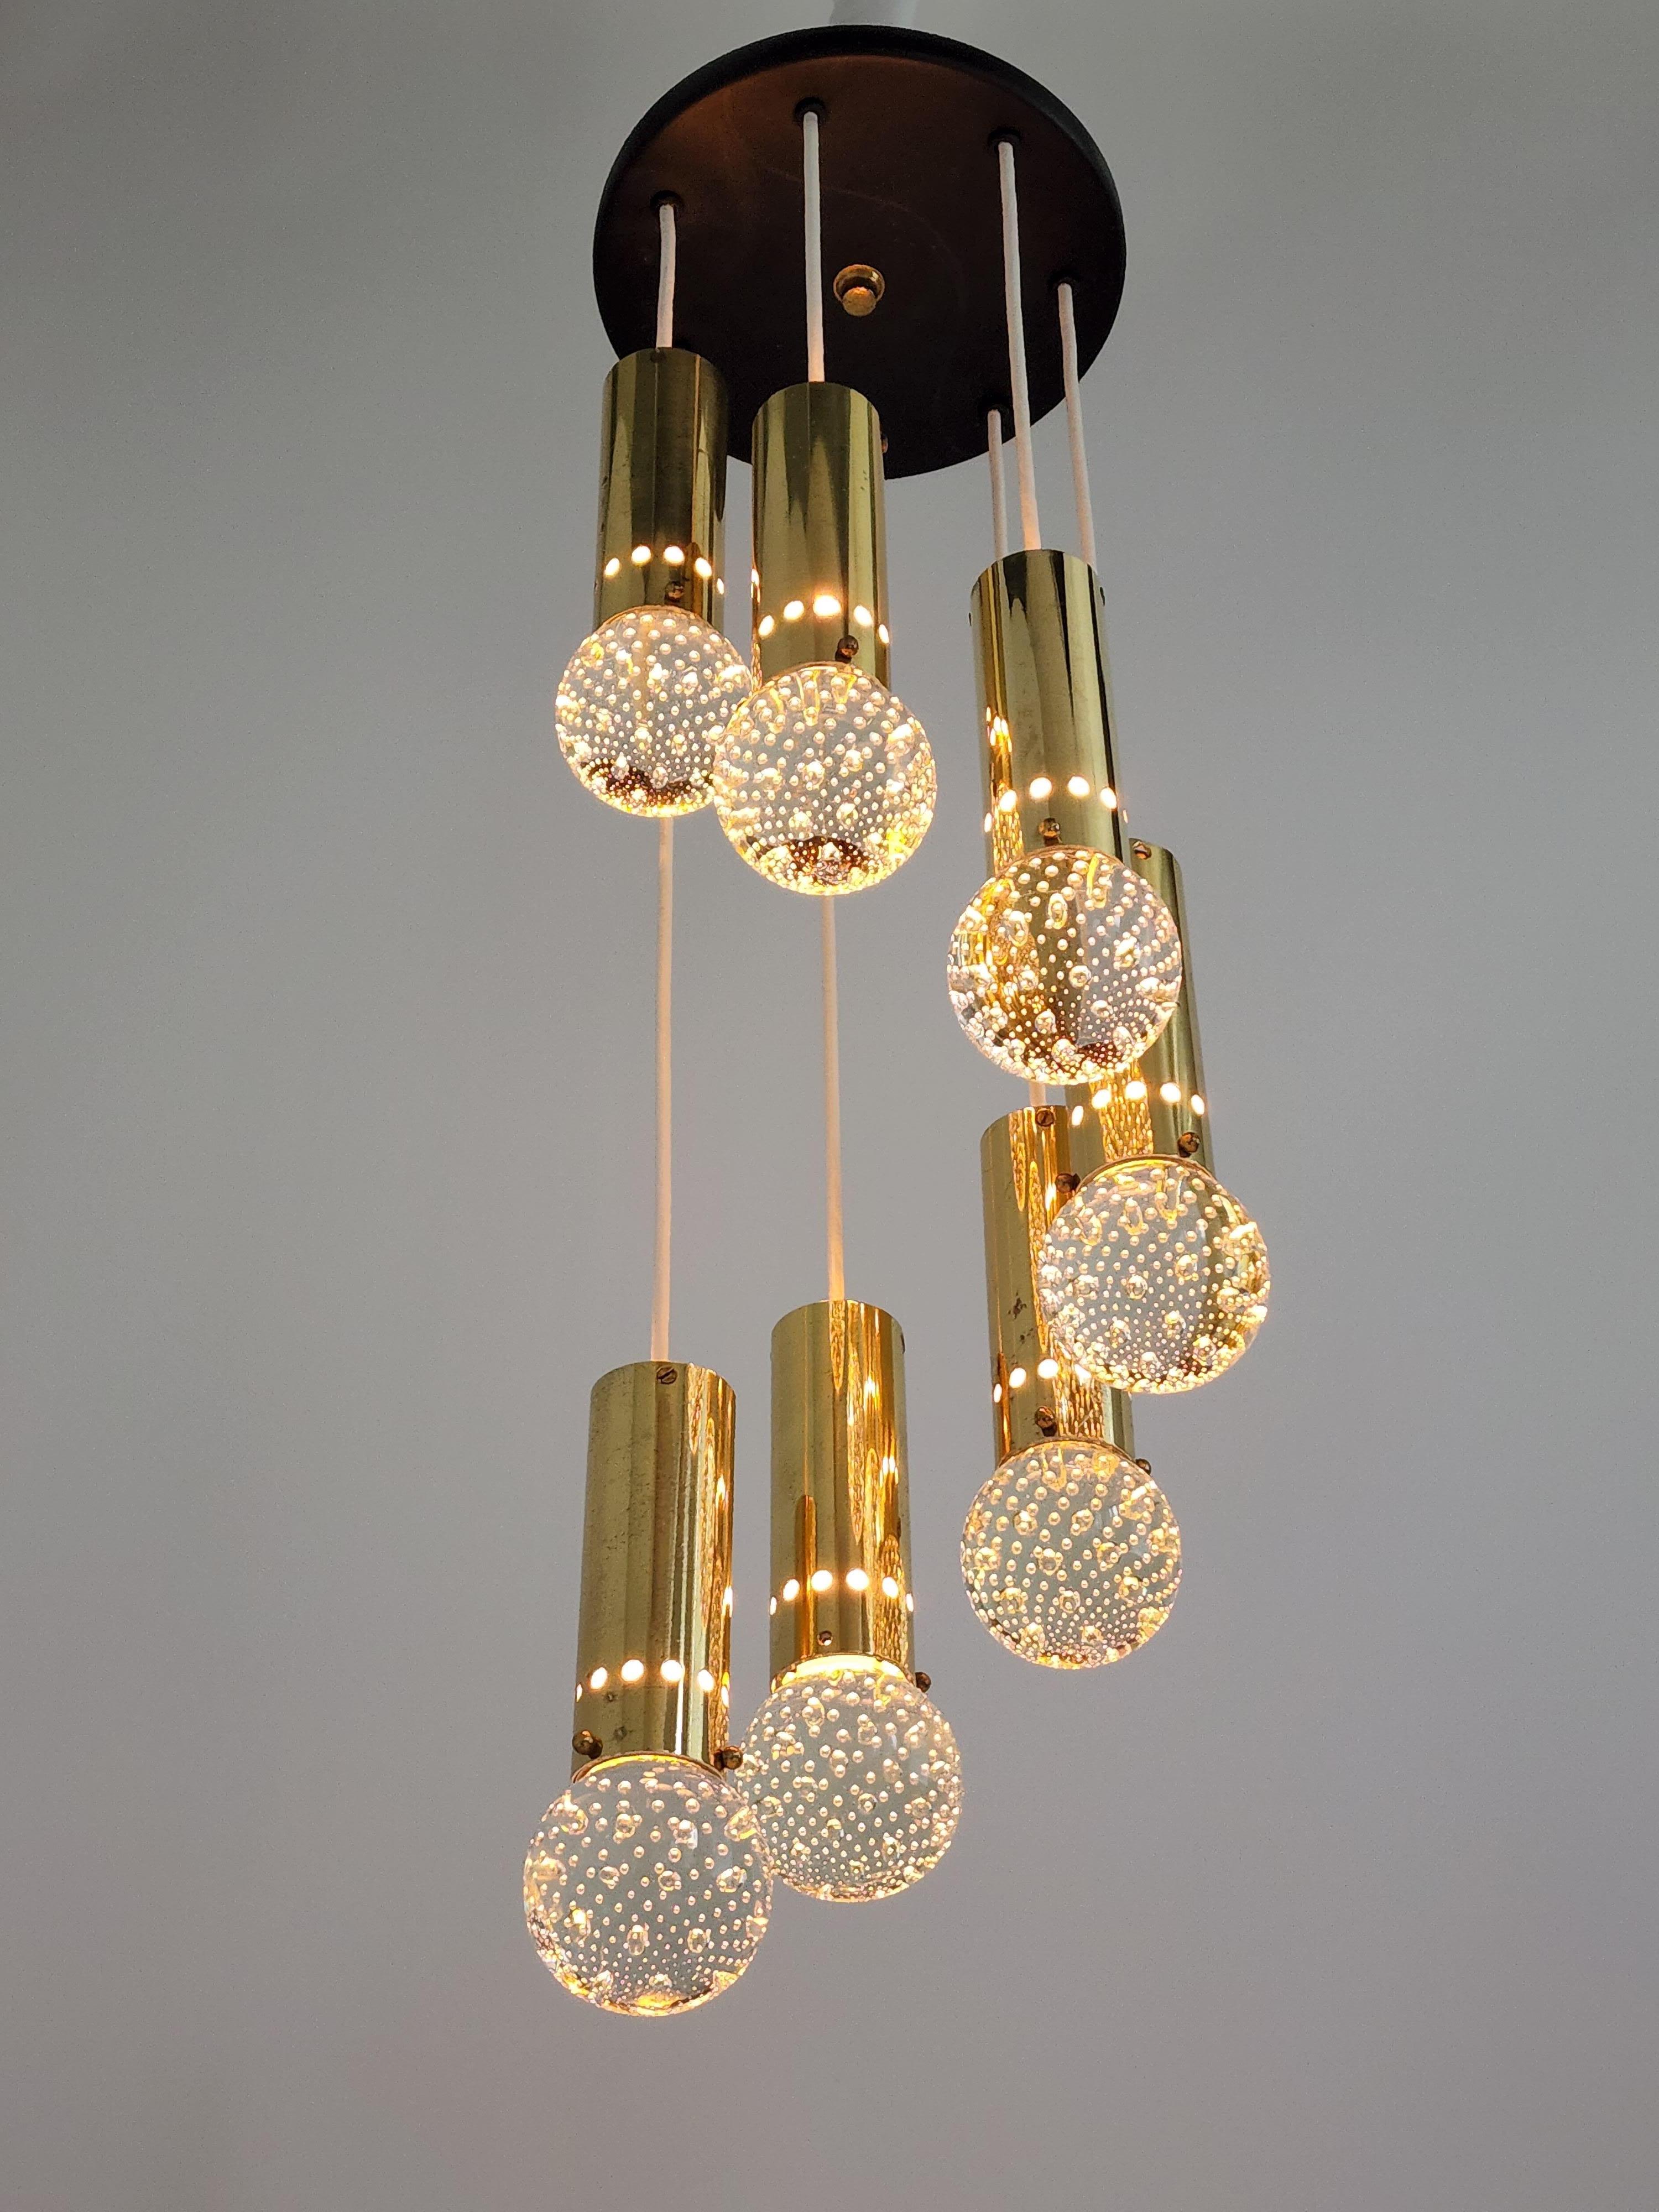 Exceptionally rare 7 bubble glass pendant from Gino Sarfatti and Archimede Seguso for Arteluce.

Made in the 60s, these fixtures where quite ahead of their time. The the thick and heavy glass ball will stun you with intriguing spiraling bubble